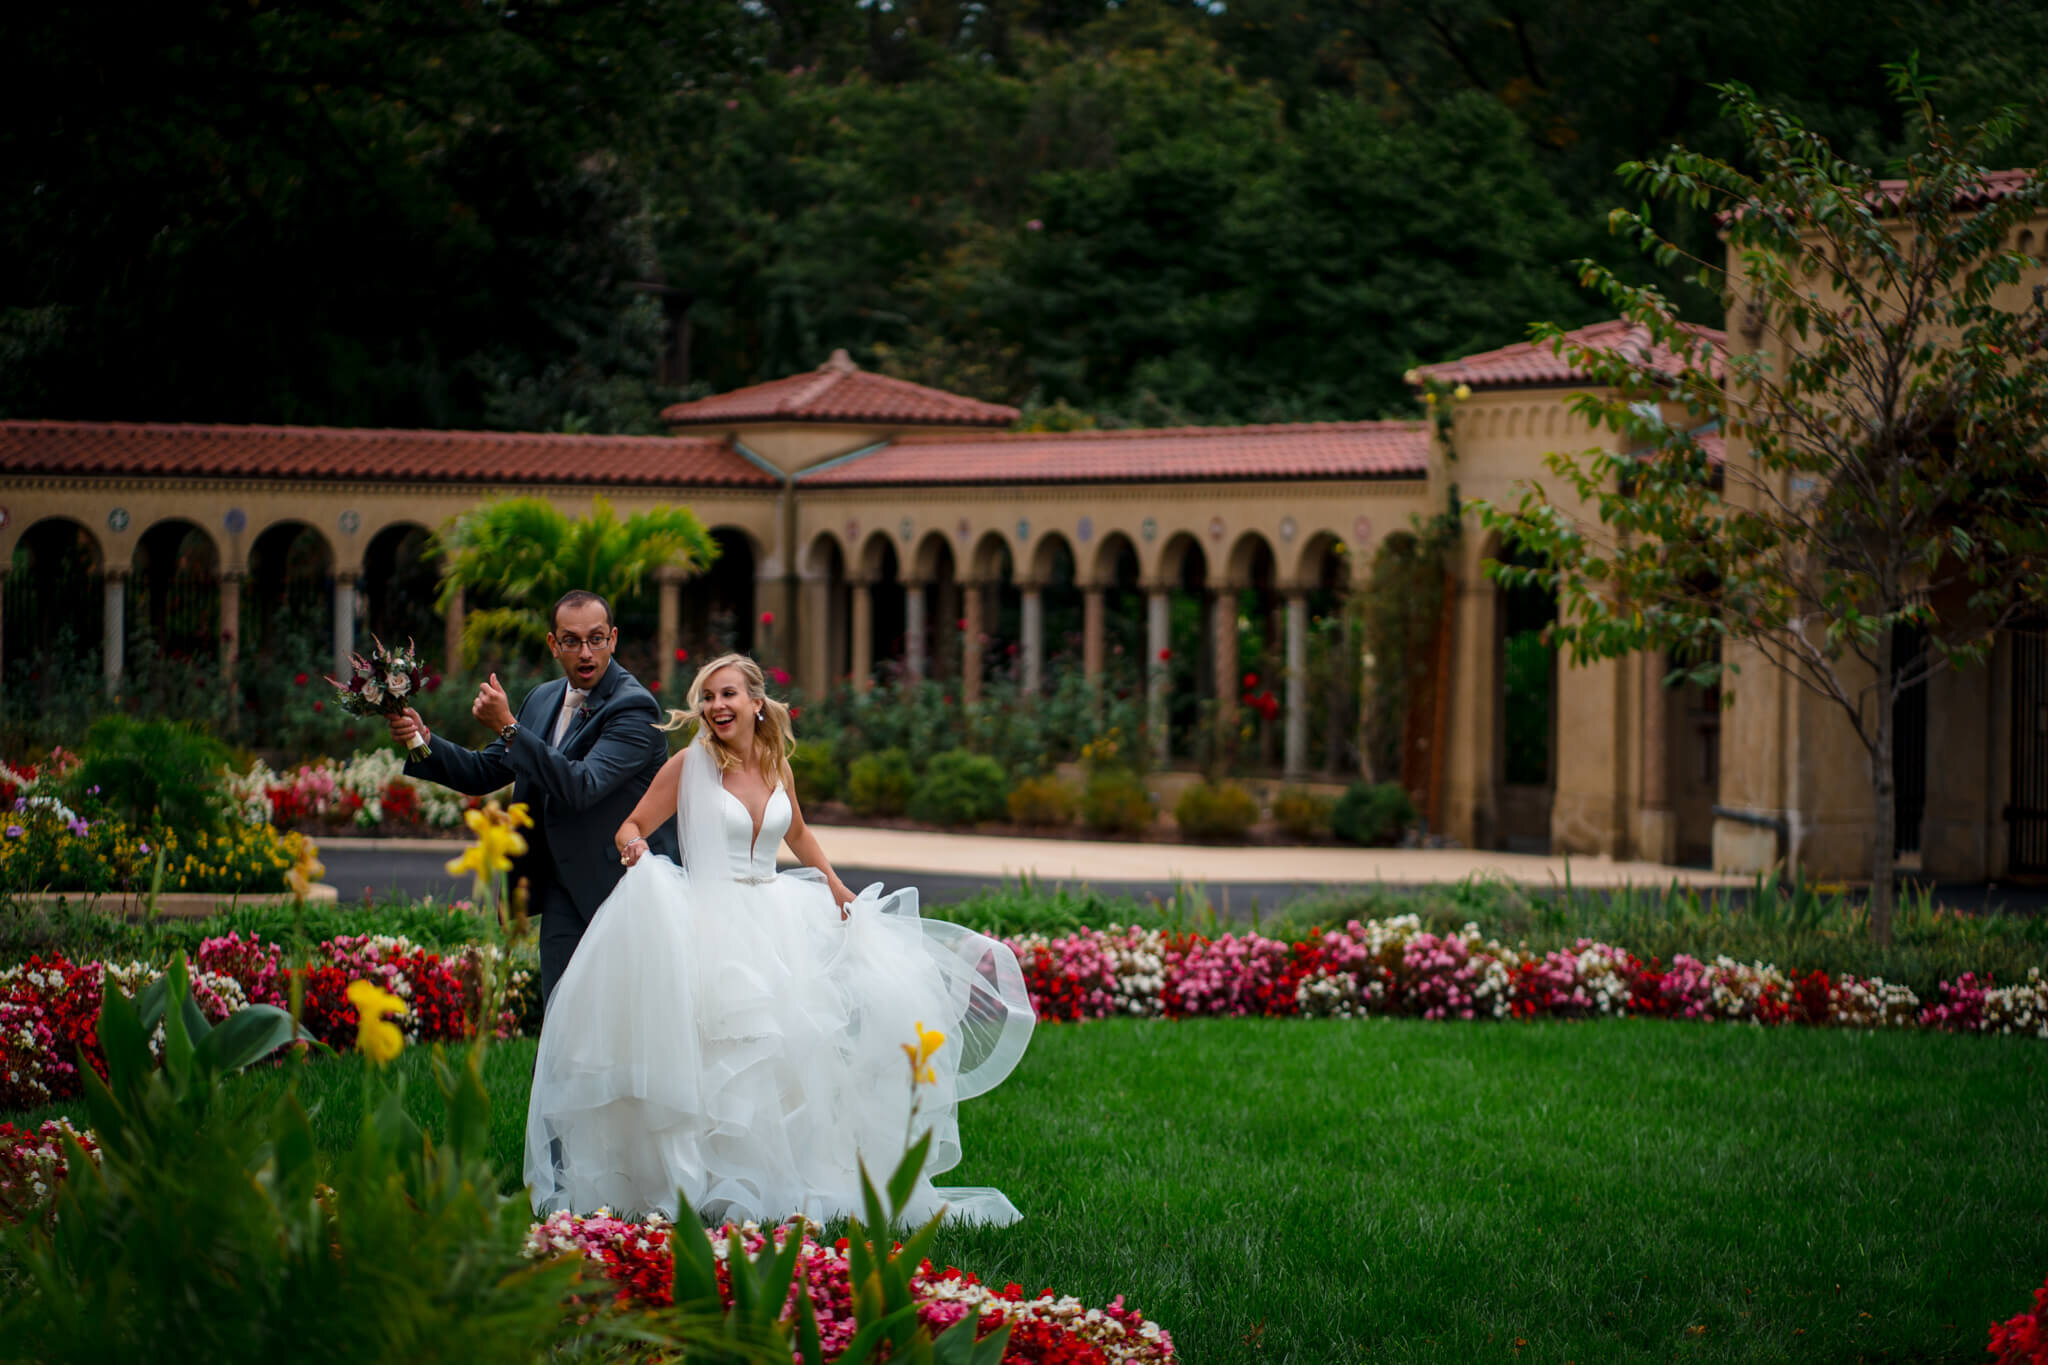 01-Washington-DC-Mini-Wedding-St-Francis-Hall-Franciscan-Monastery-First-Look-Photography-by-Bee-Two-Sweet-174.jpg